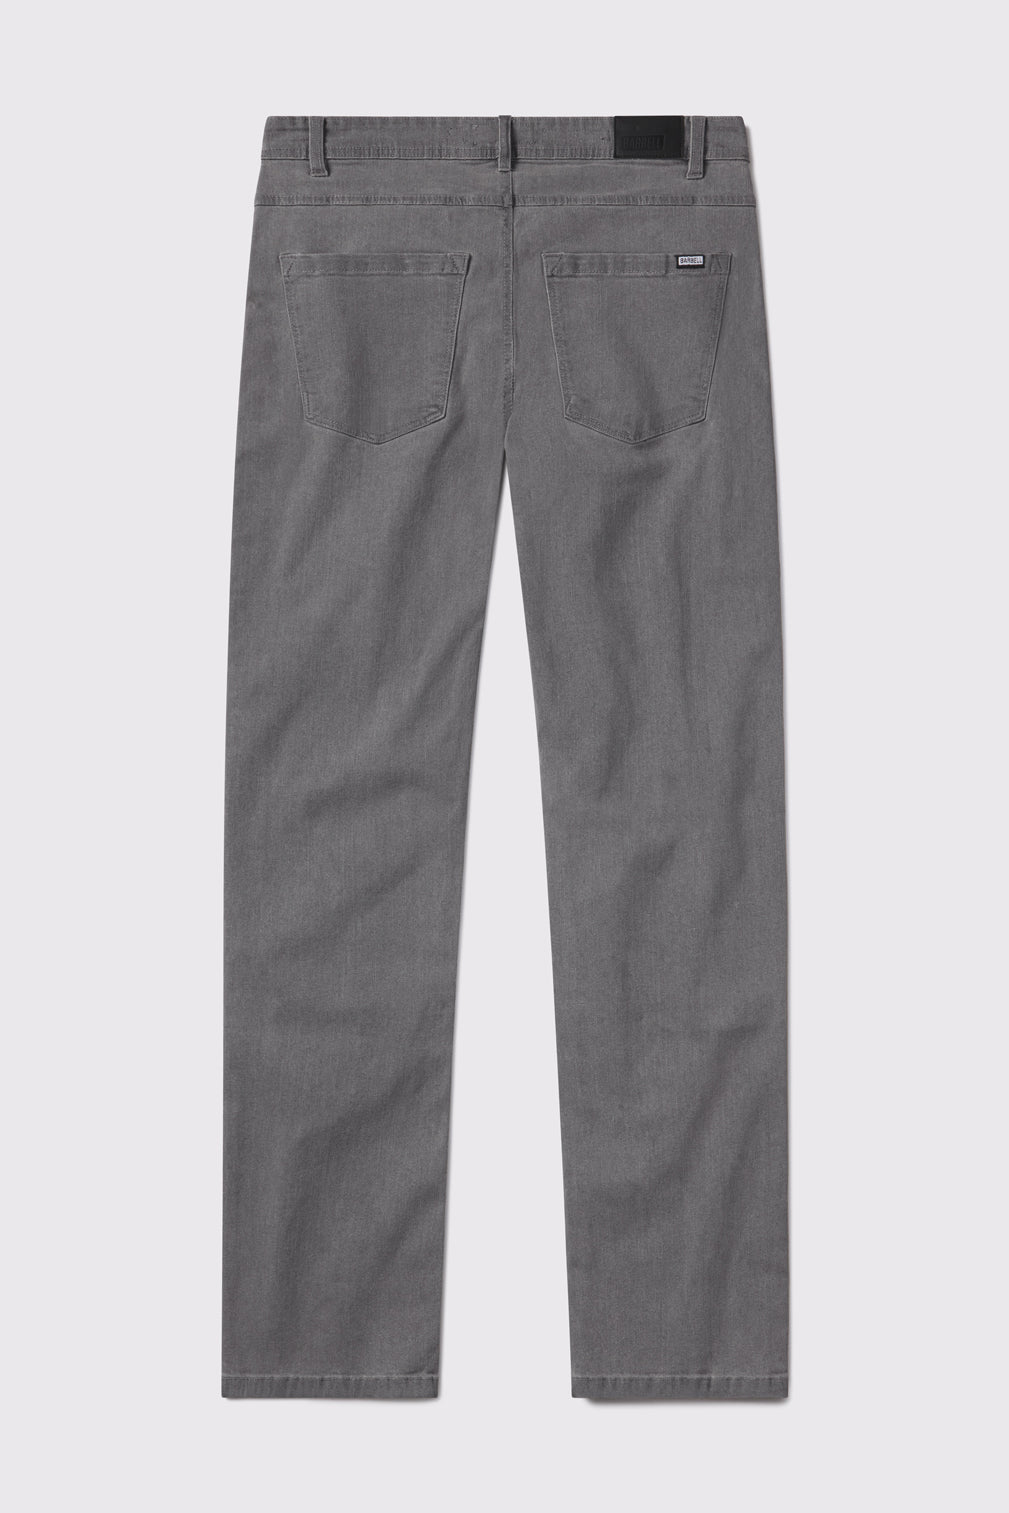 Mens Relaxed Athletic Fit Jeans 2.0 -Cement - photo from back flat lay #color_cement